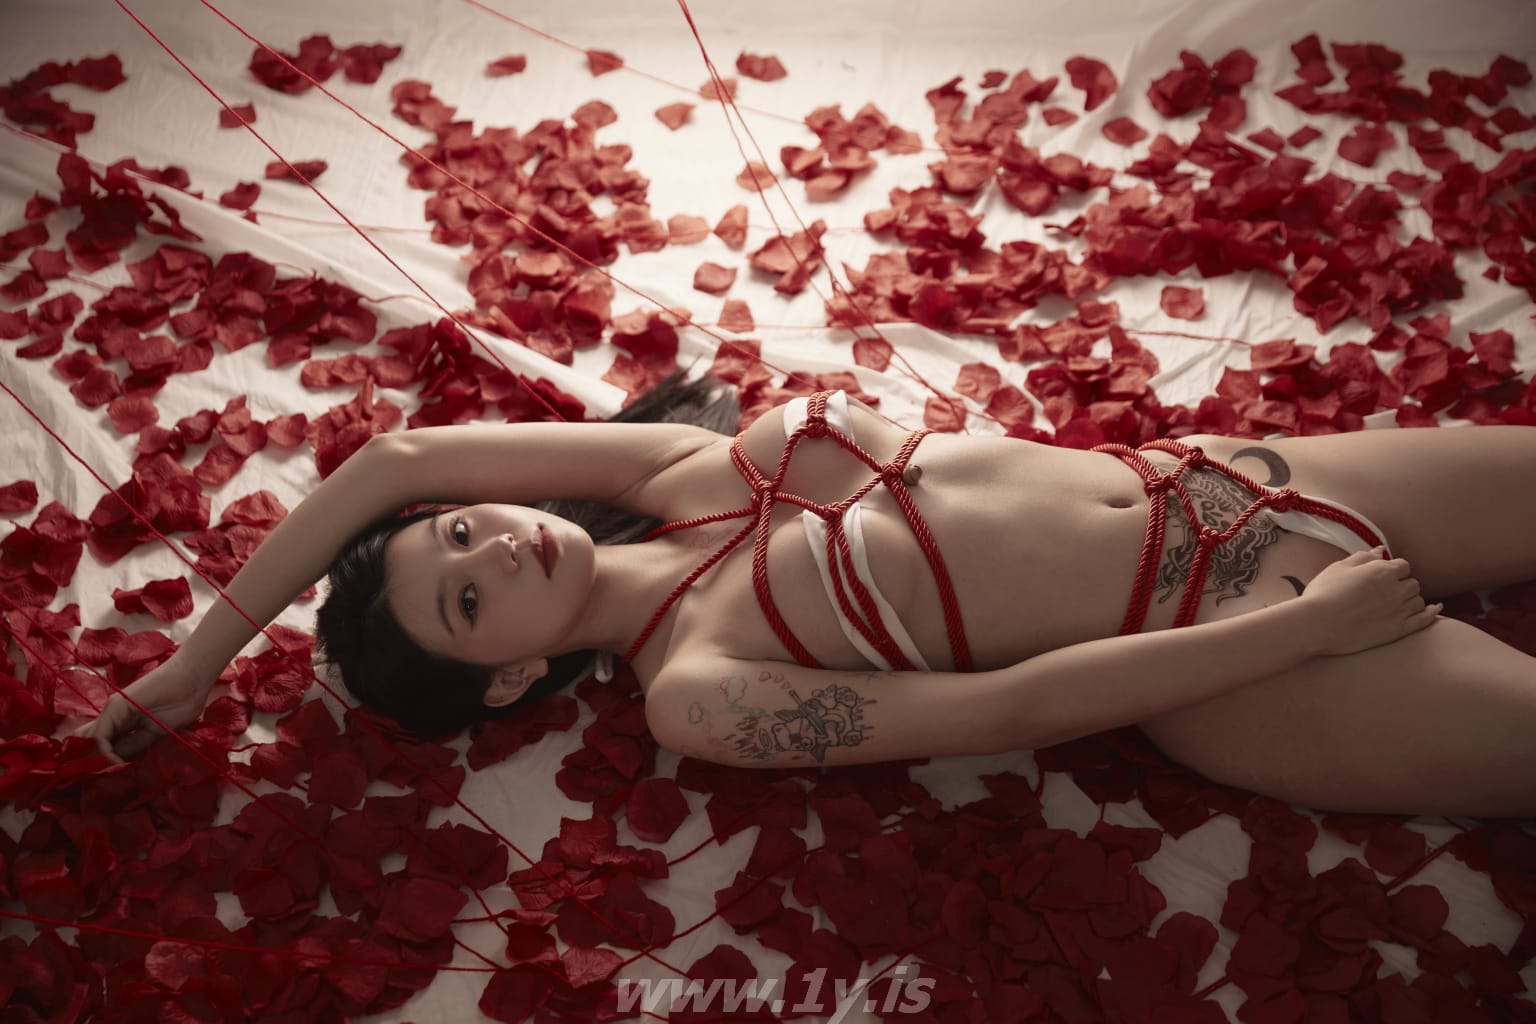 Petals and Rope (7)